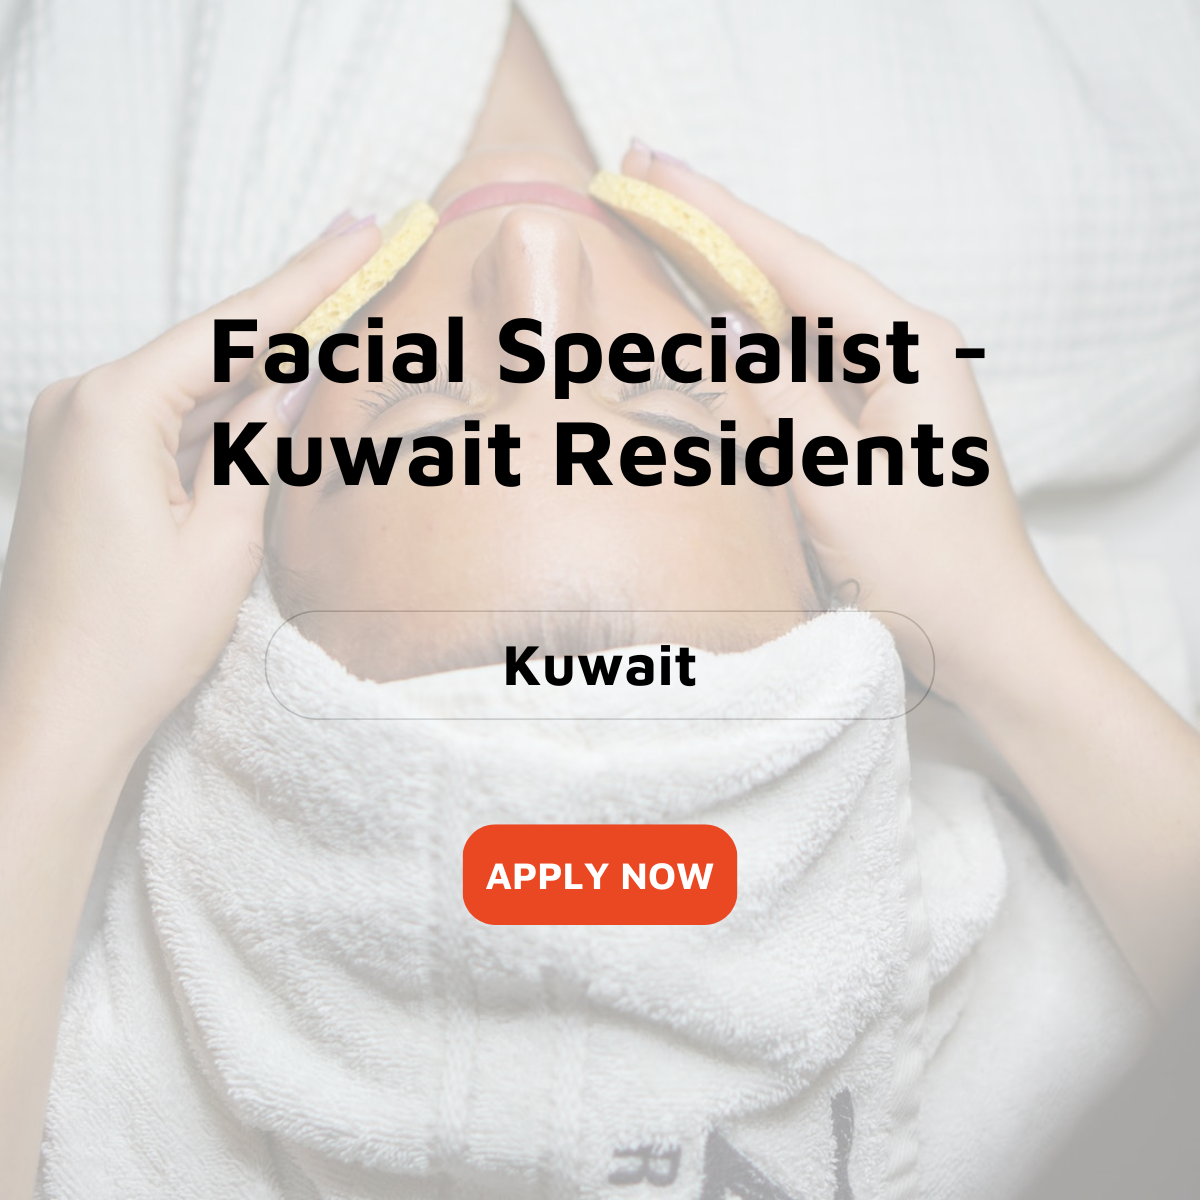 Facial Specialist - Kuwait Residents